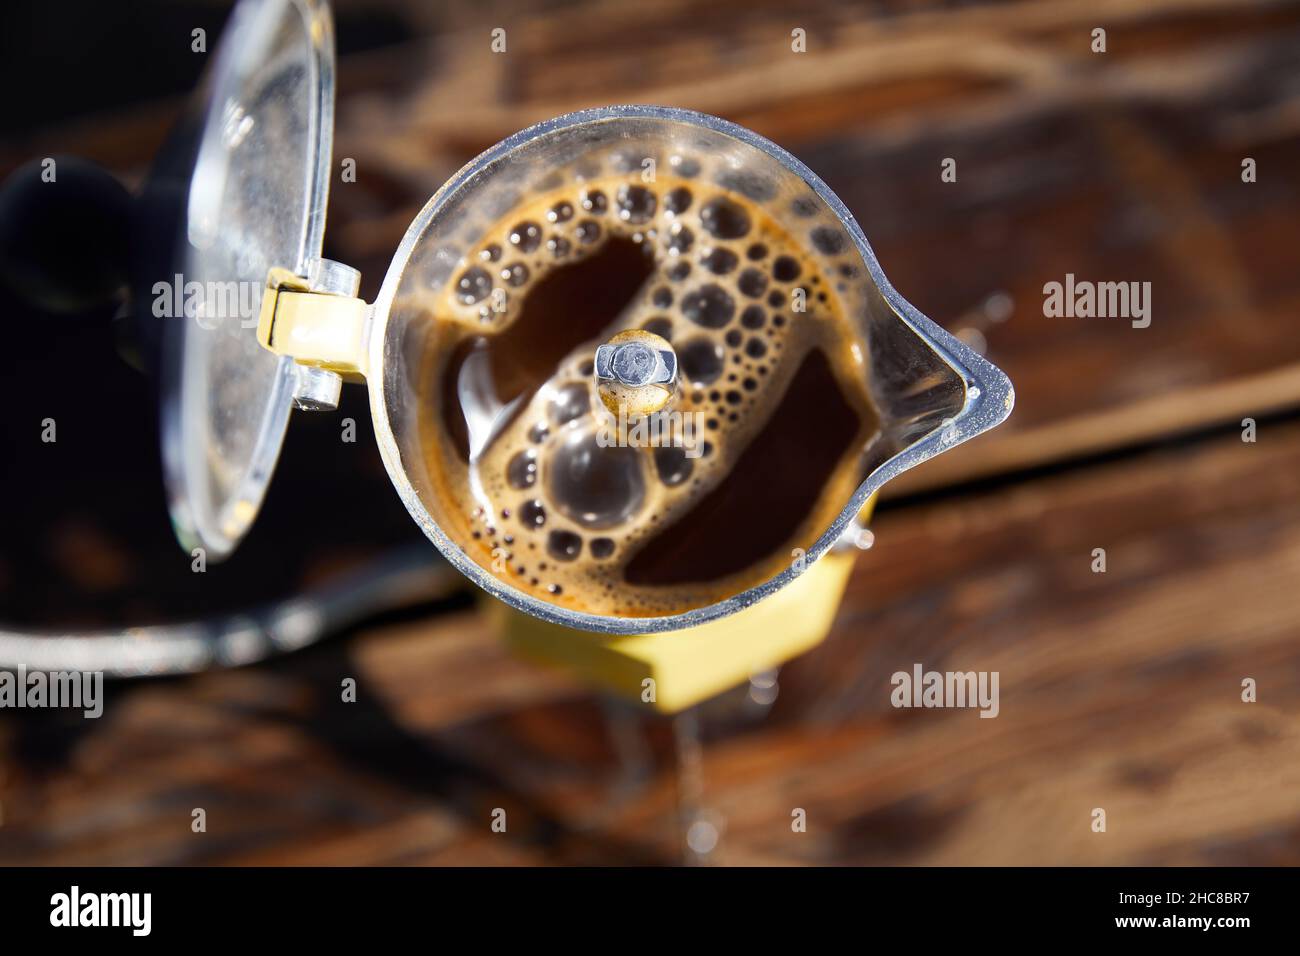 Yellow Moka coffee pot on stove on table with open cover with brown hot beverage inside. Old style coffee vintage pot outdoor camping Stock Photo